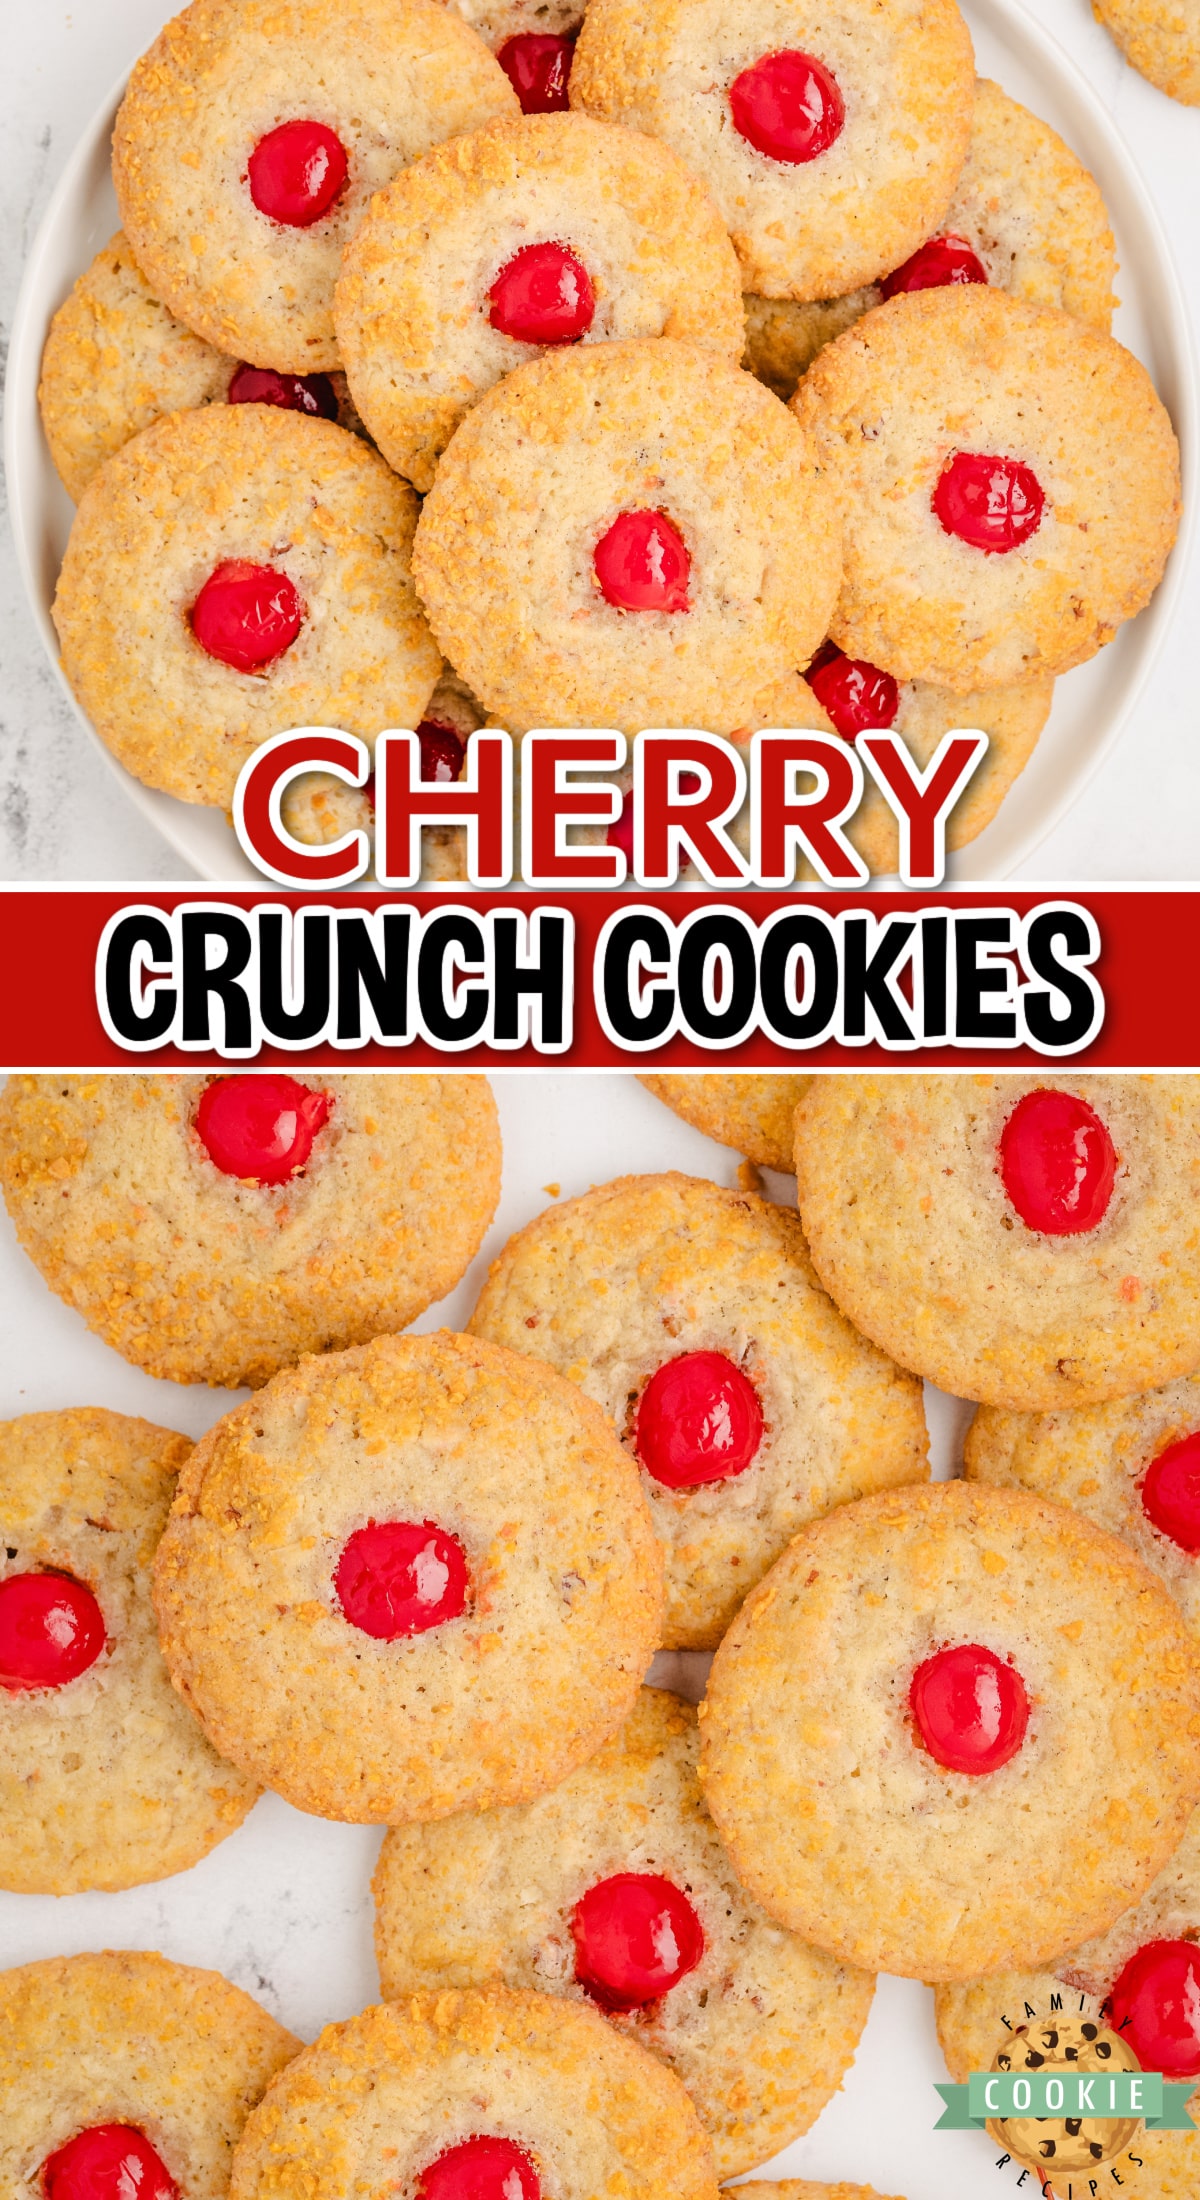 Cherry Crunch Cookies are a delicious combination of crispy cereal, shredded coconut & juicy cherries, which give them incredible texture and flavor!